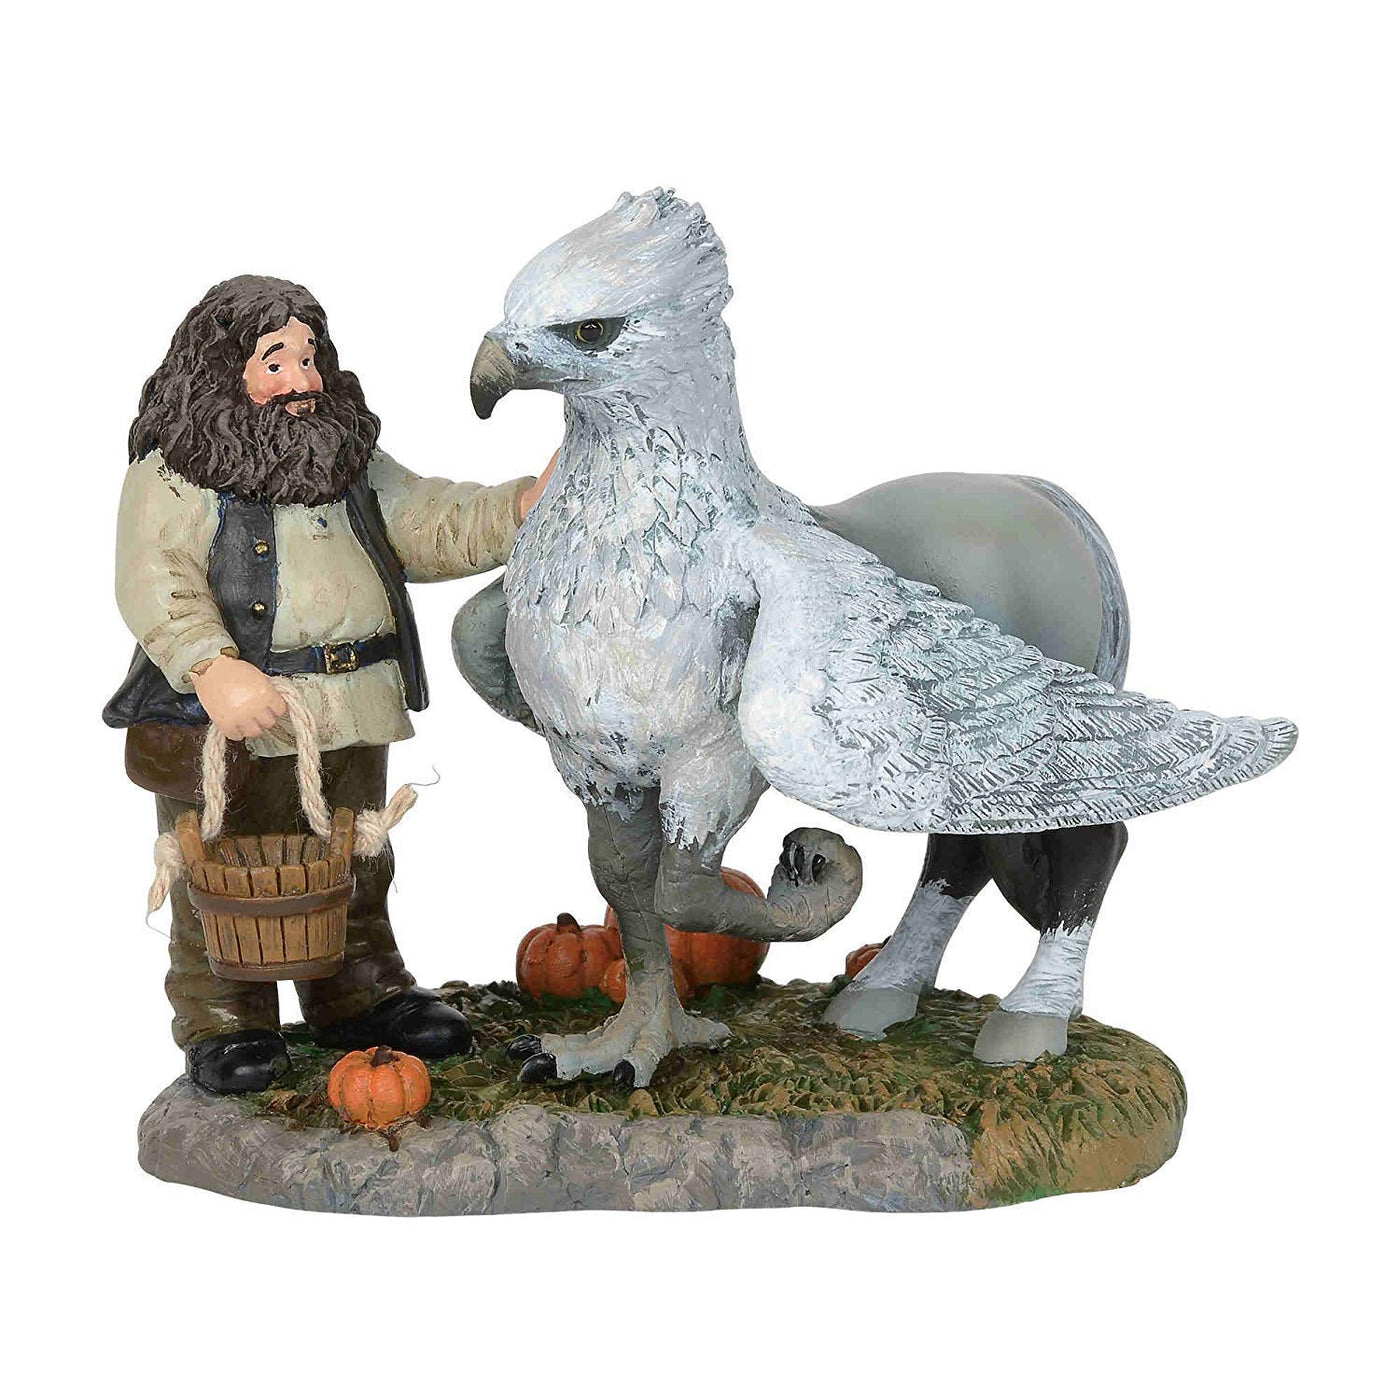 Department 56 Harry Potter Village A Proud Hippogriff Indeed Figurine New w Box